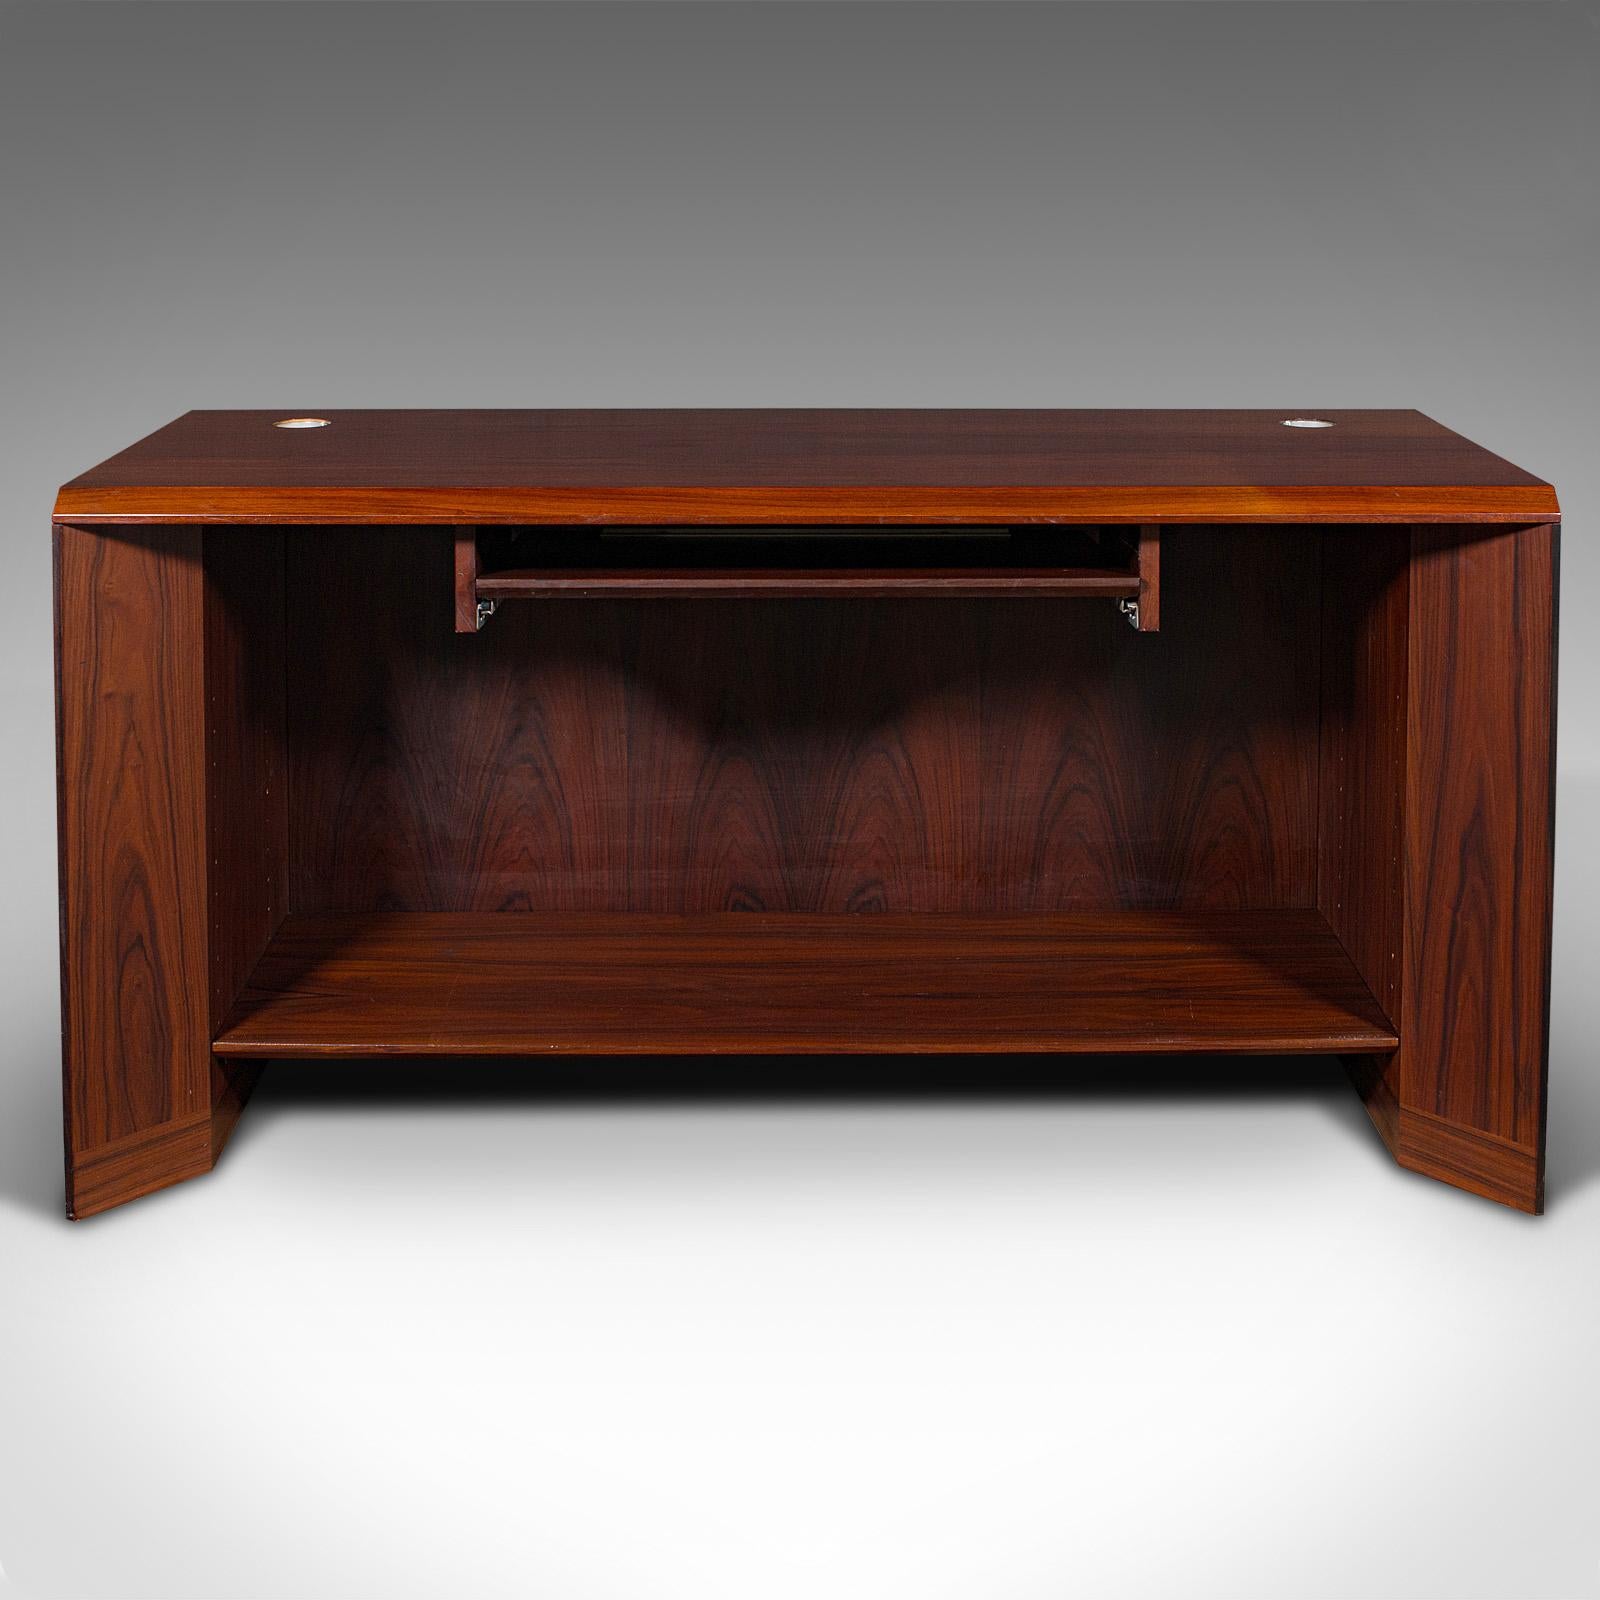 This is a vintage secretary's desk. A Danish, rosewood narrow office table by Sibast Mobel, dating to the late 20th century, circa 1970.

Sibast Mobel was founded by Helge Sibast (1908 - 1985) a Danish craftsman with an eye for mixing tradition and